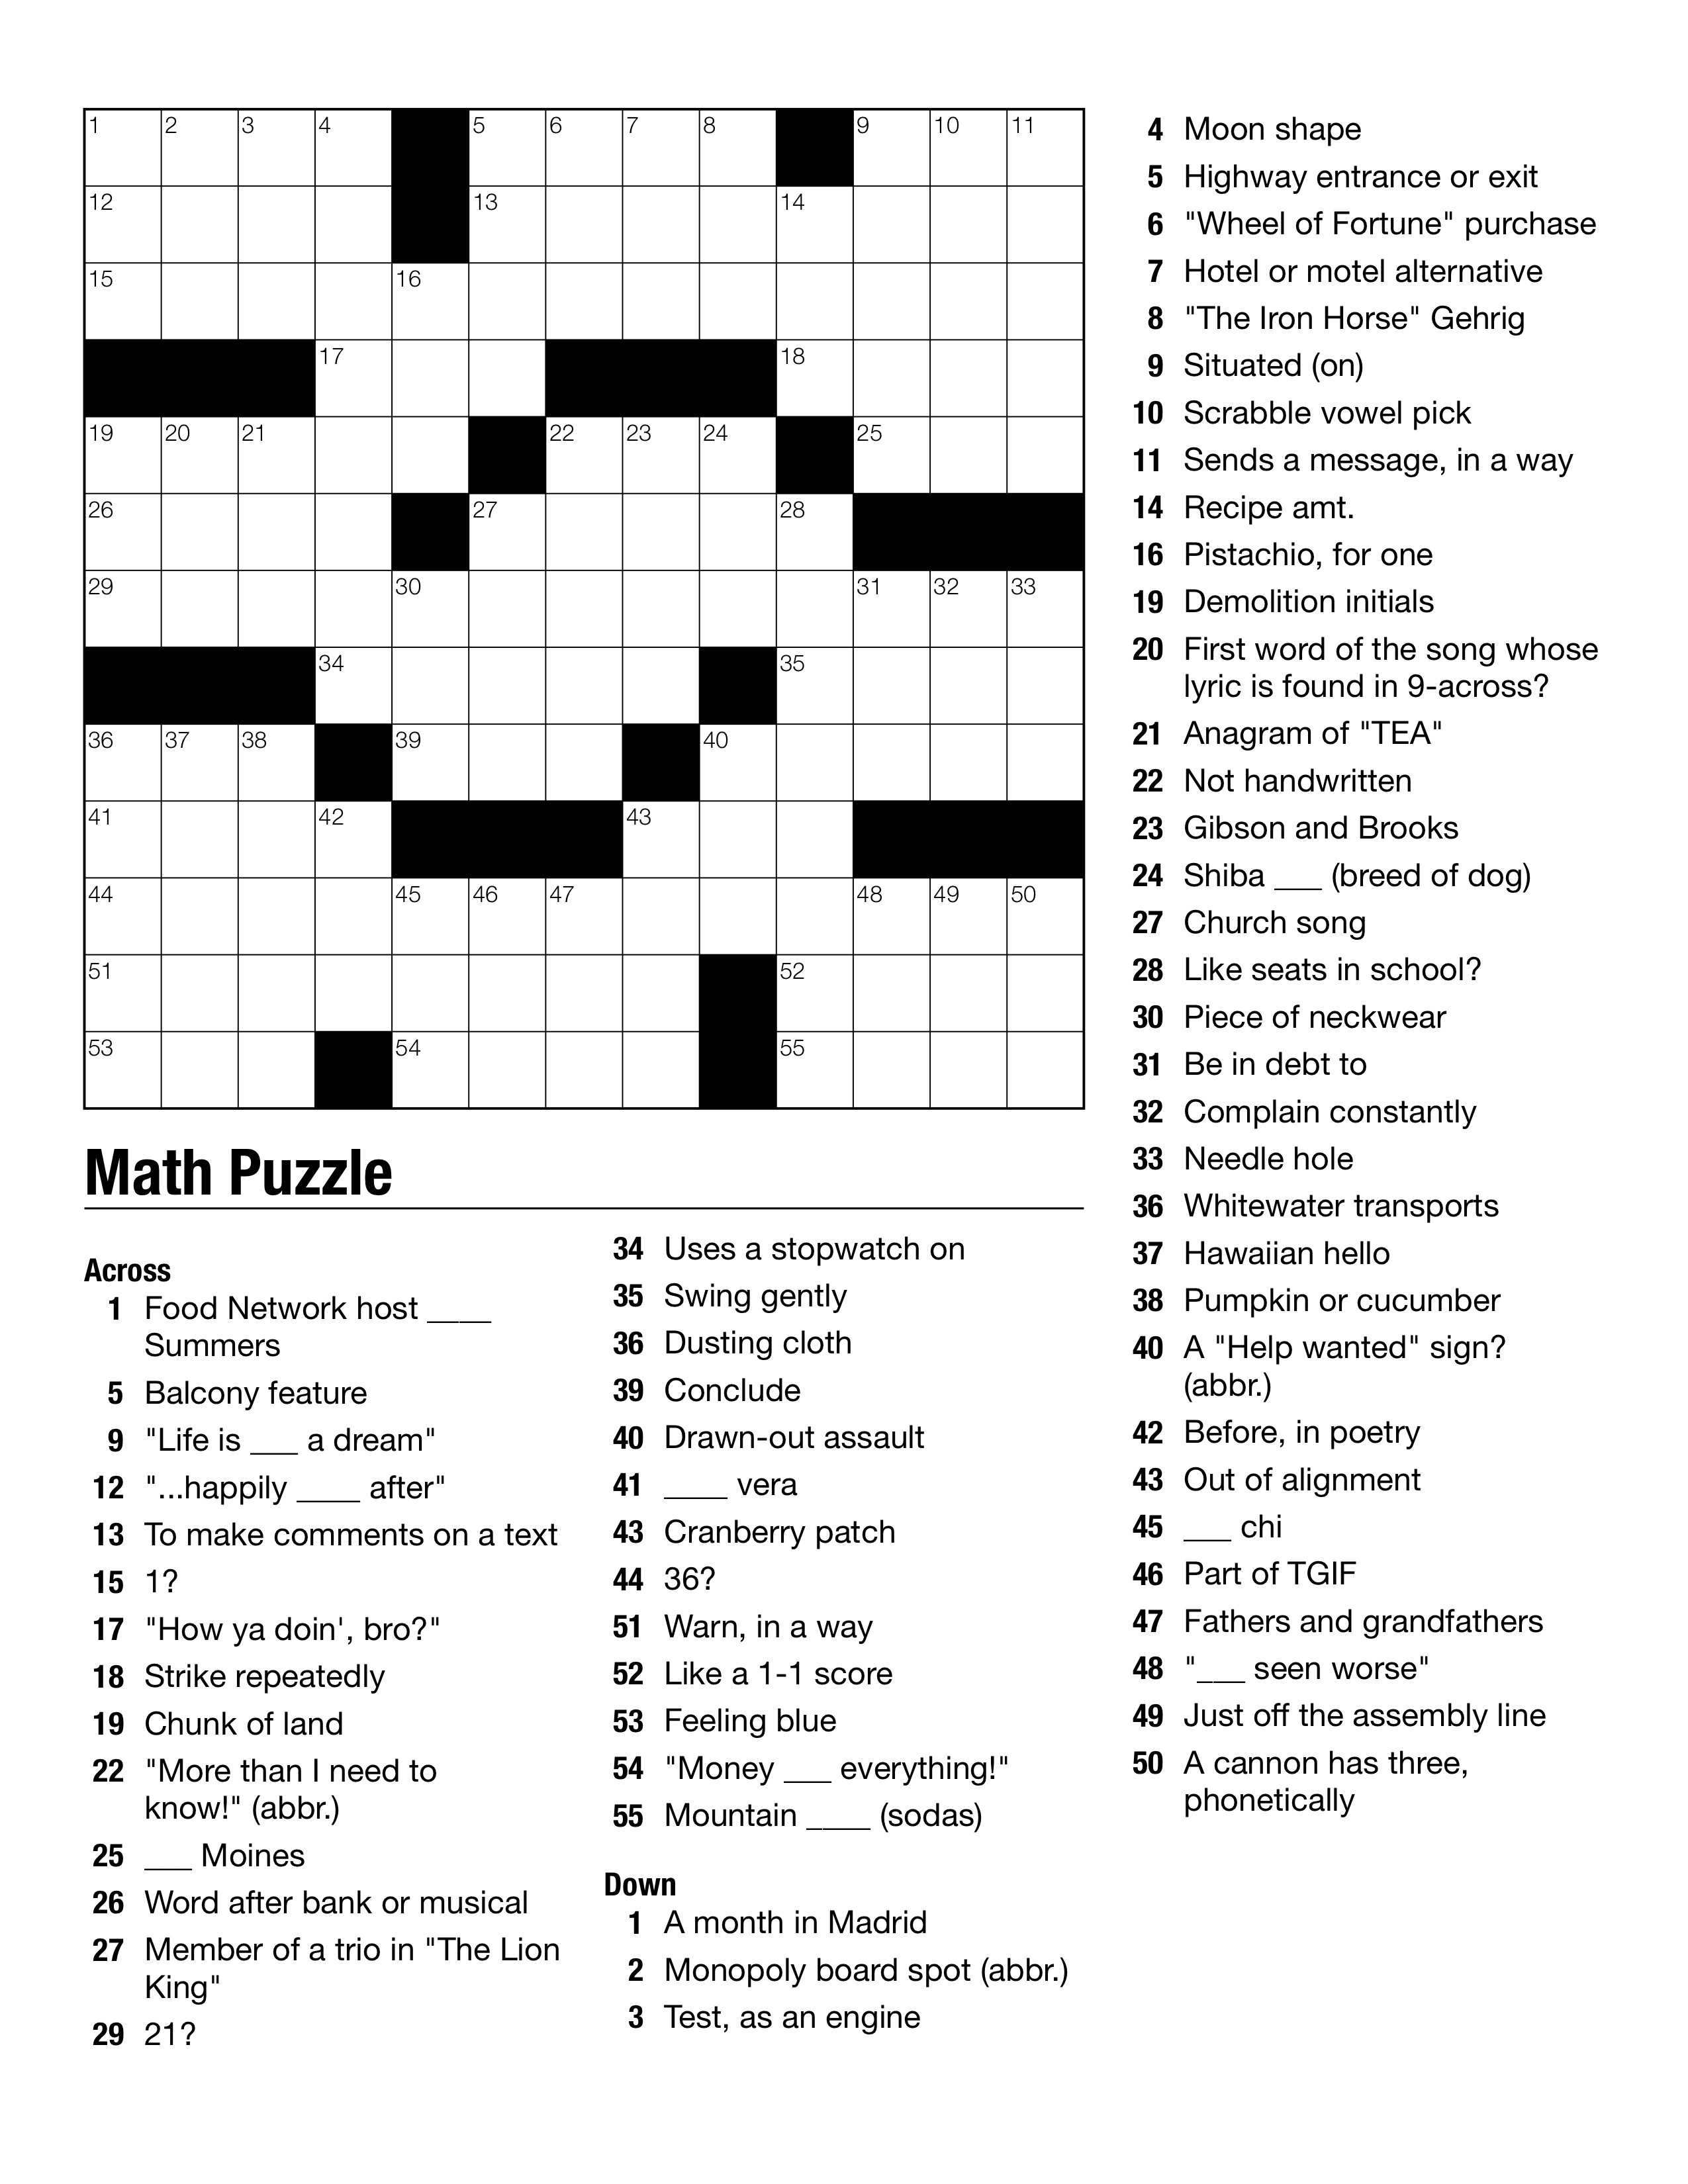 Mrs In France Daily Themed Crossword